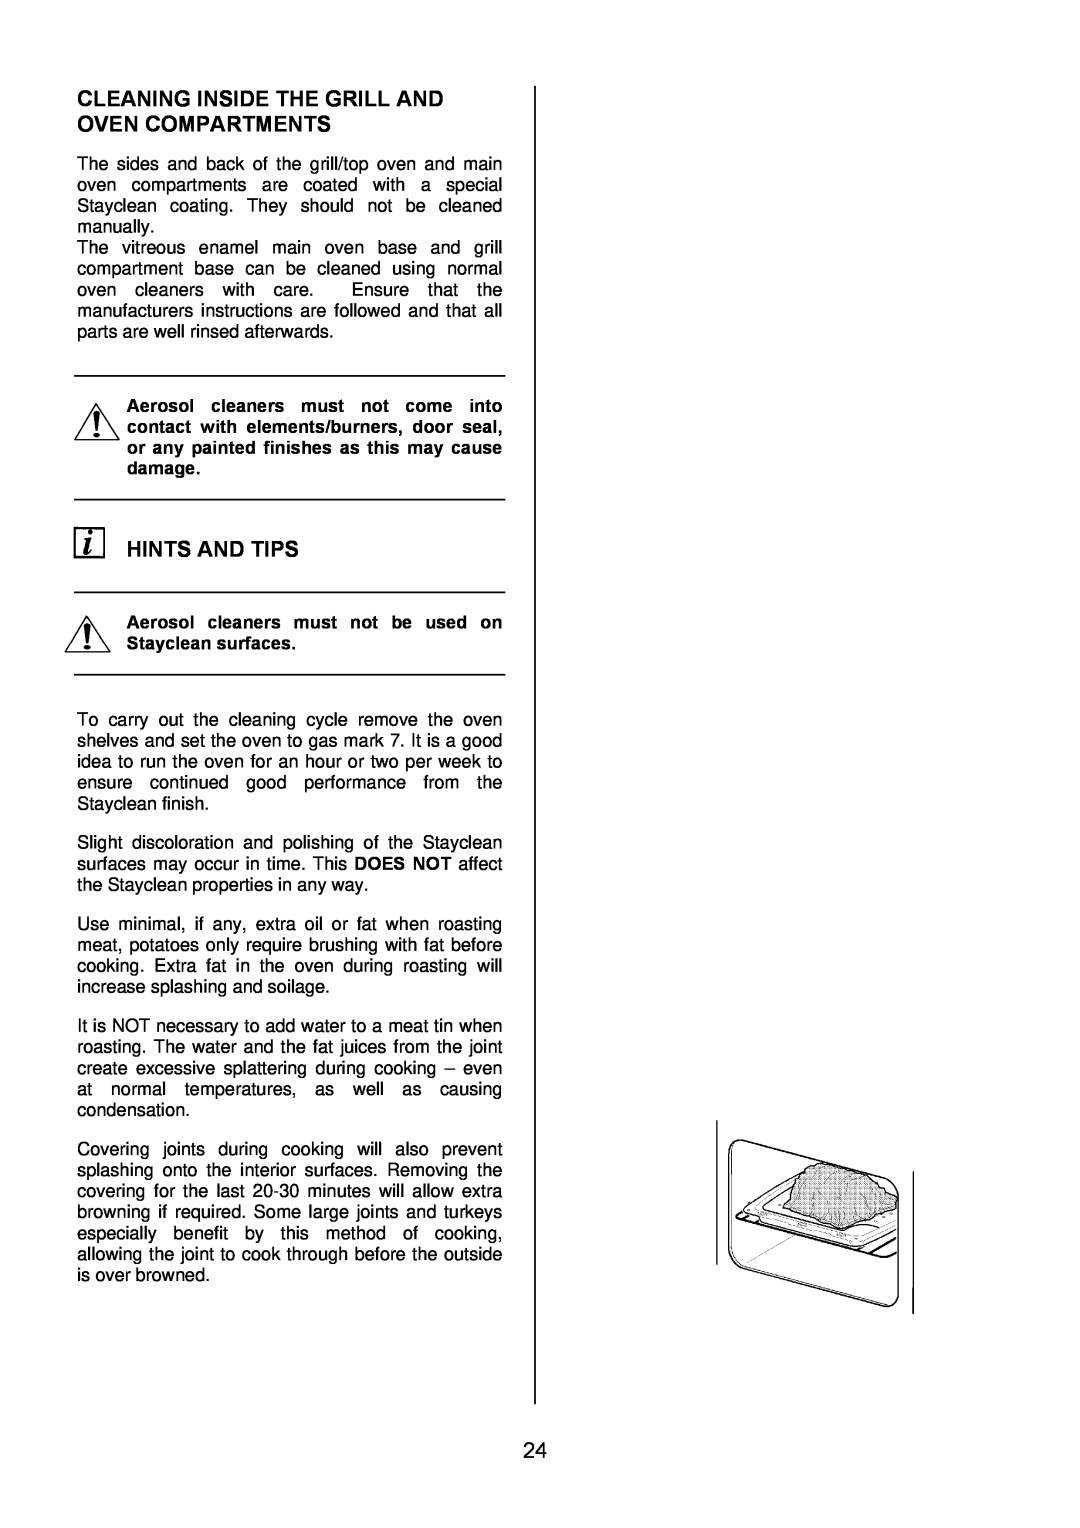 Electrolux EKG6049 user manual Cleaning Inside The Grill And Oven Compartments, Hints And Tips 